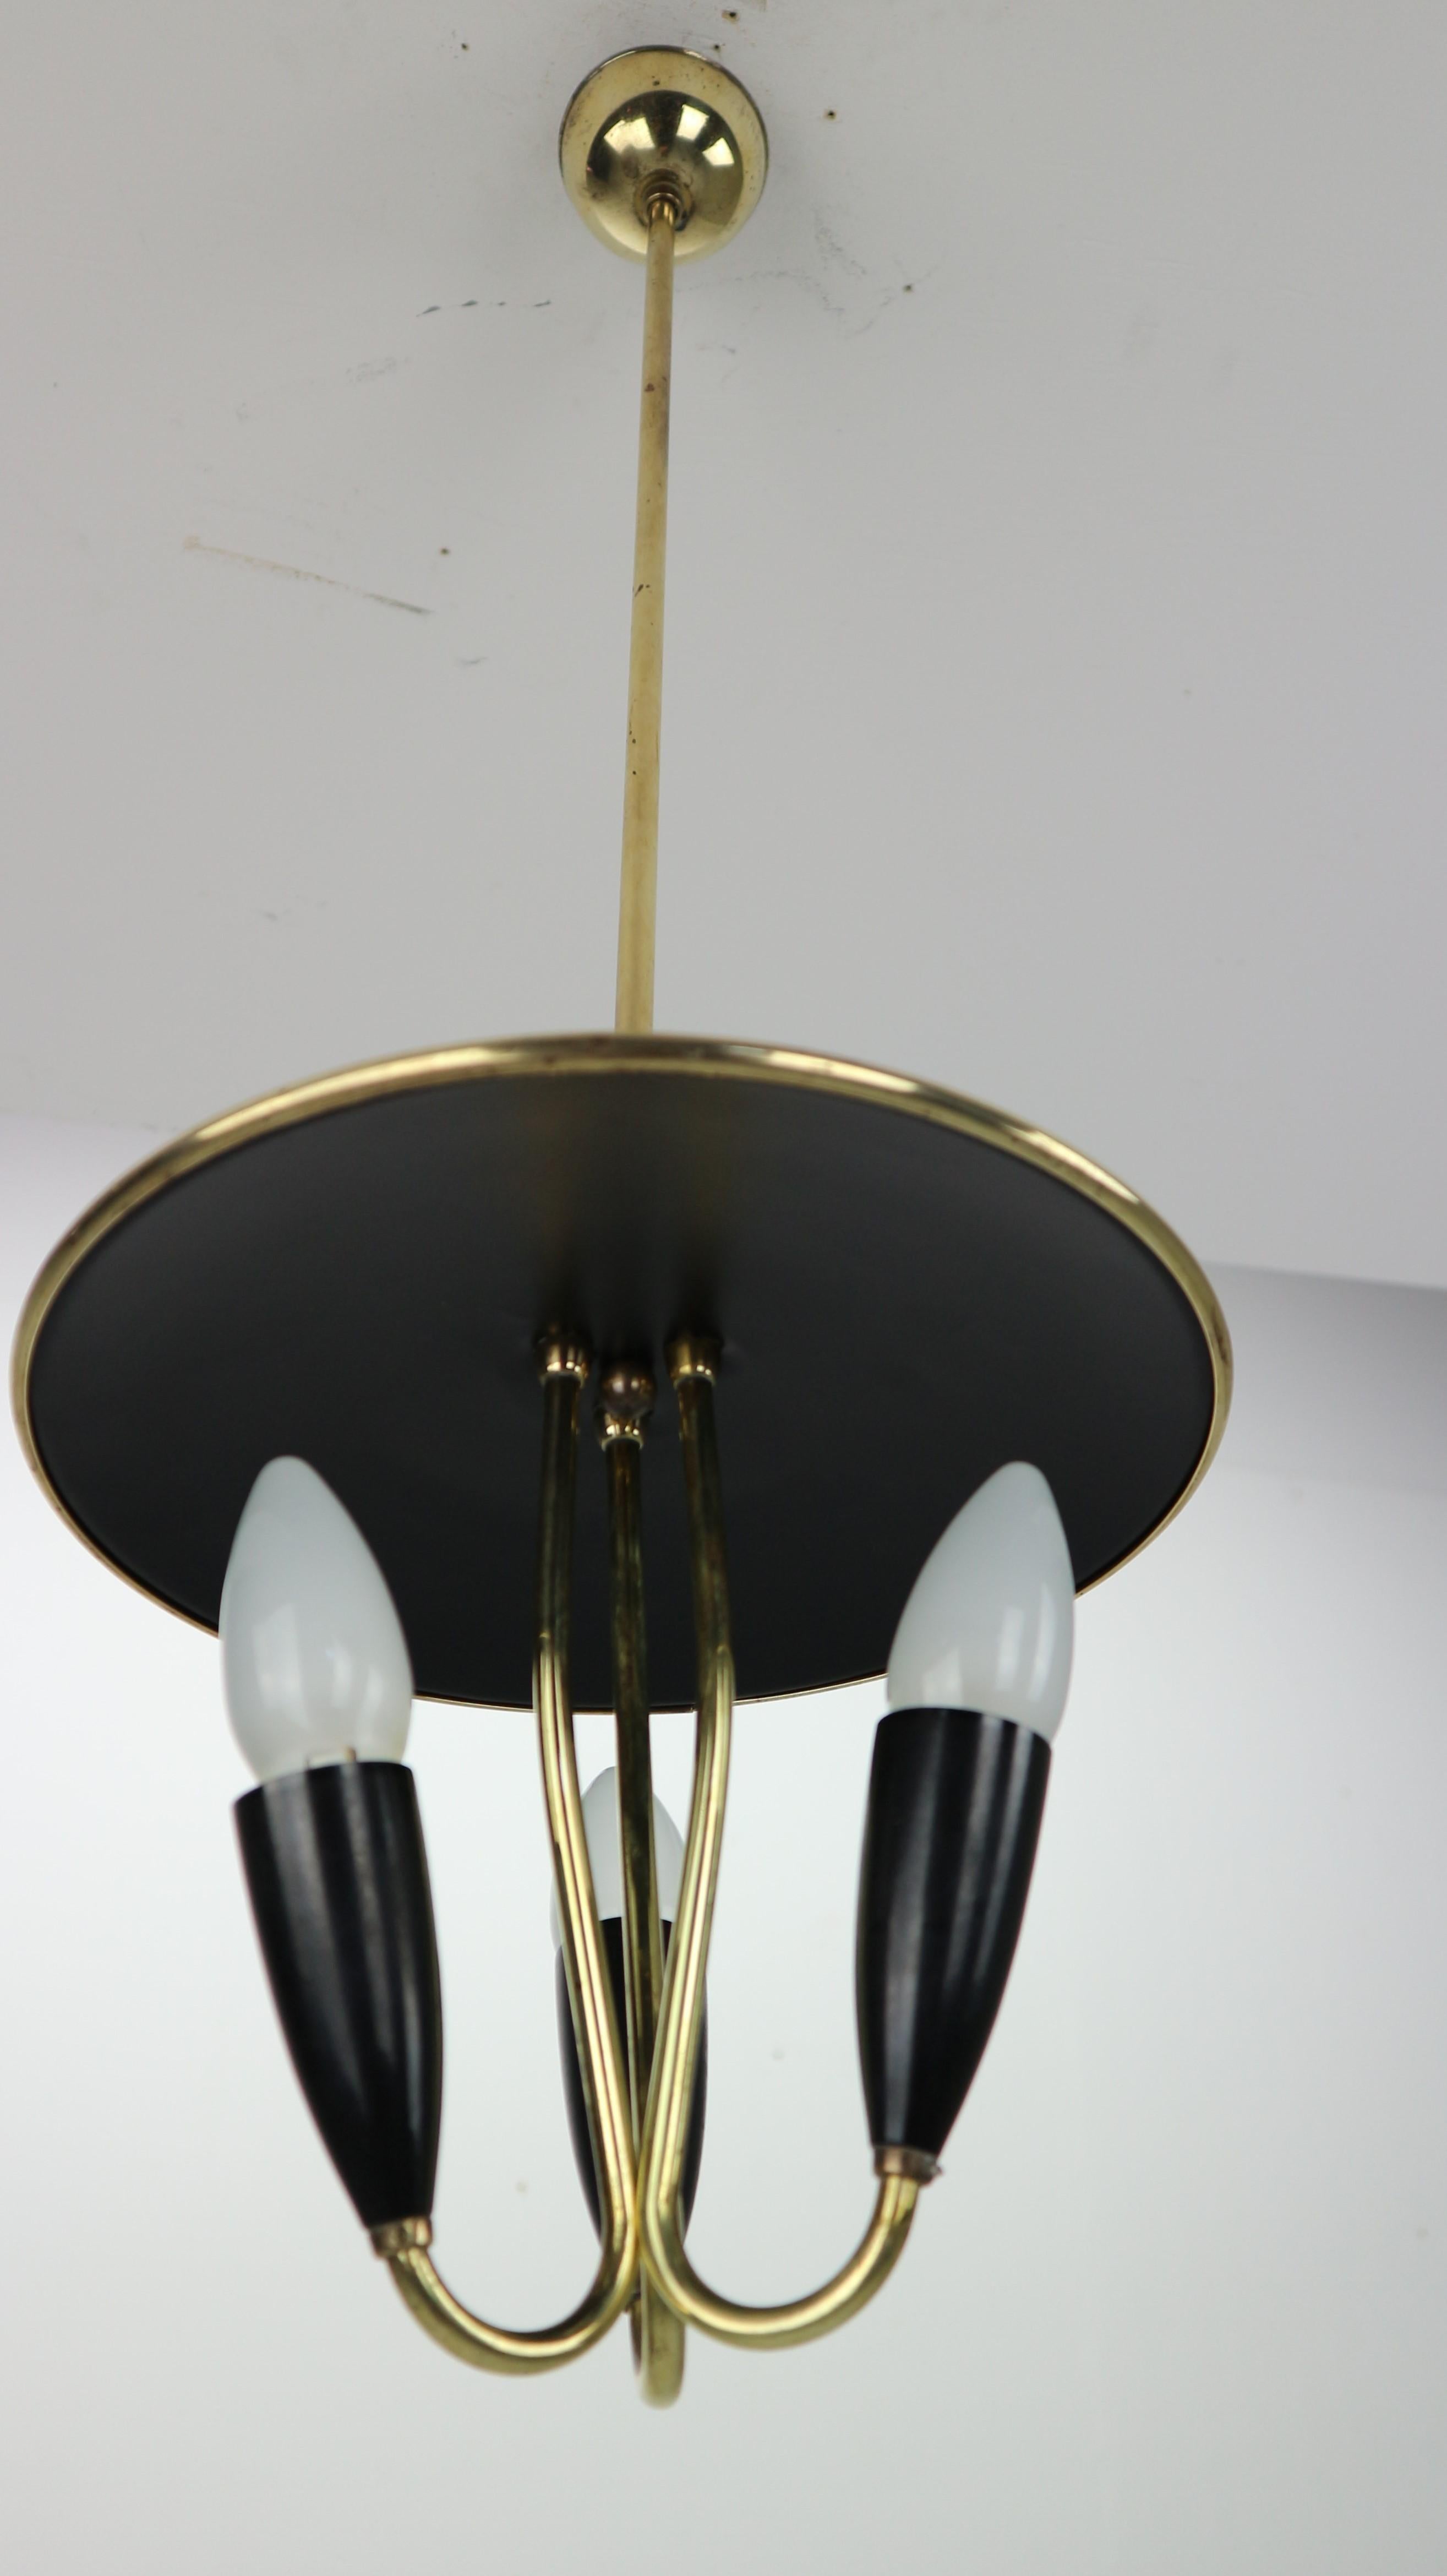 French Mid-Century Modern Brass and Black Metal Chandelier Lamp, 1950s 4